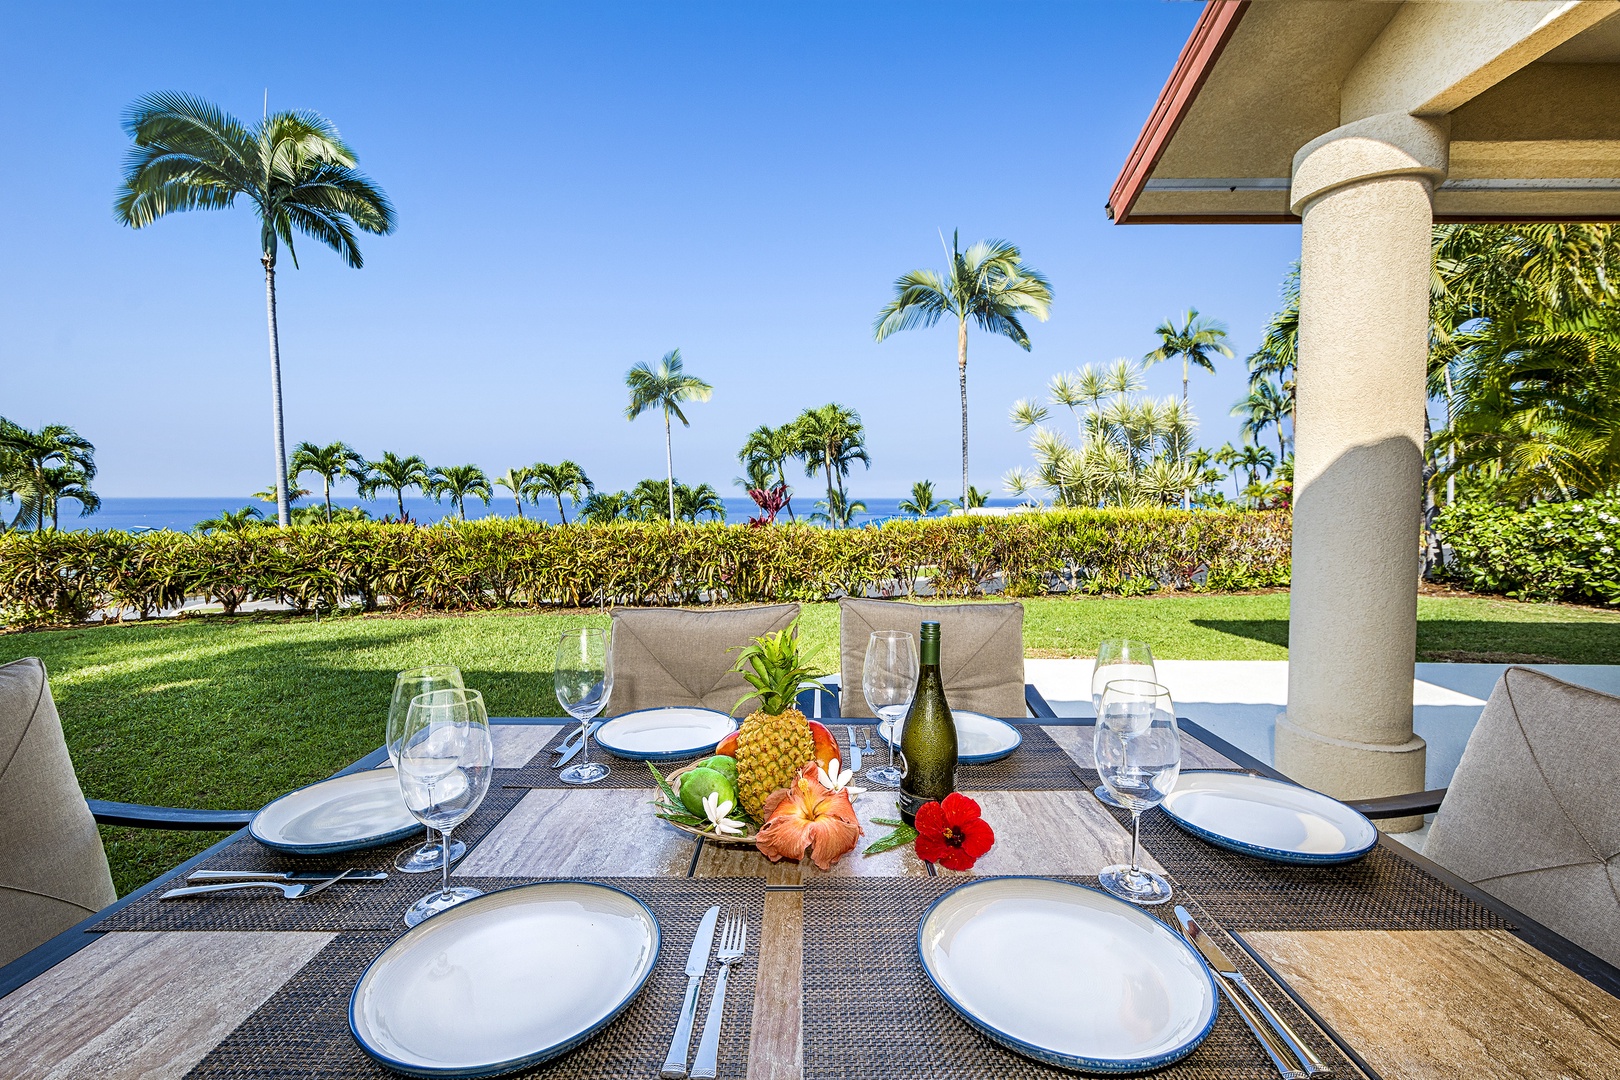 Kailua Kona Vacation Rentals, Maile Hale - Enjoy water views and a home made meal on the spacious partially covered Lanai!